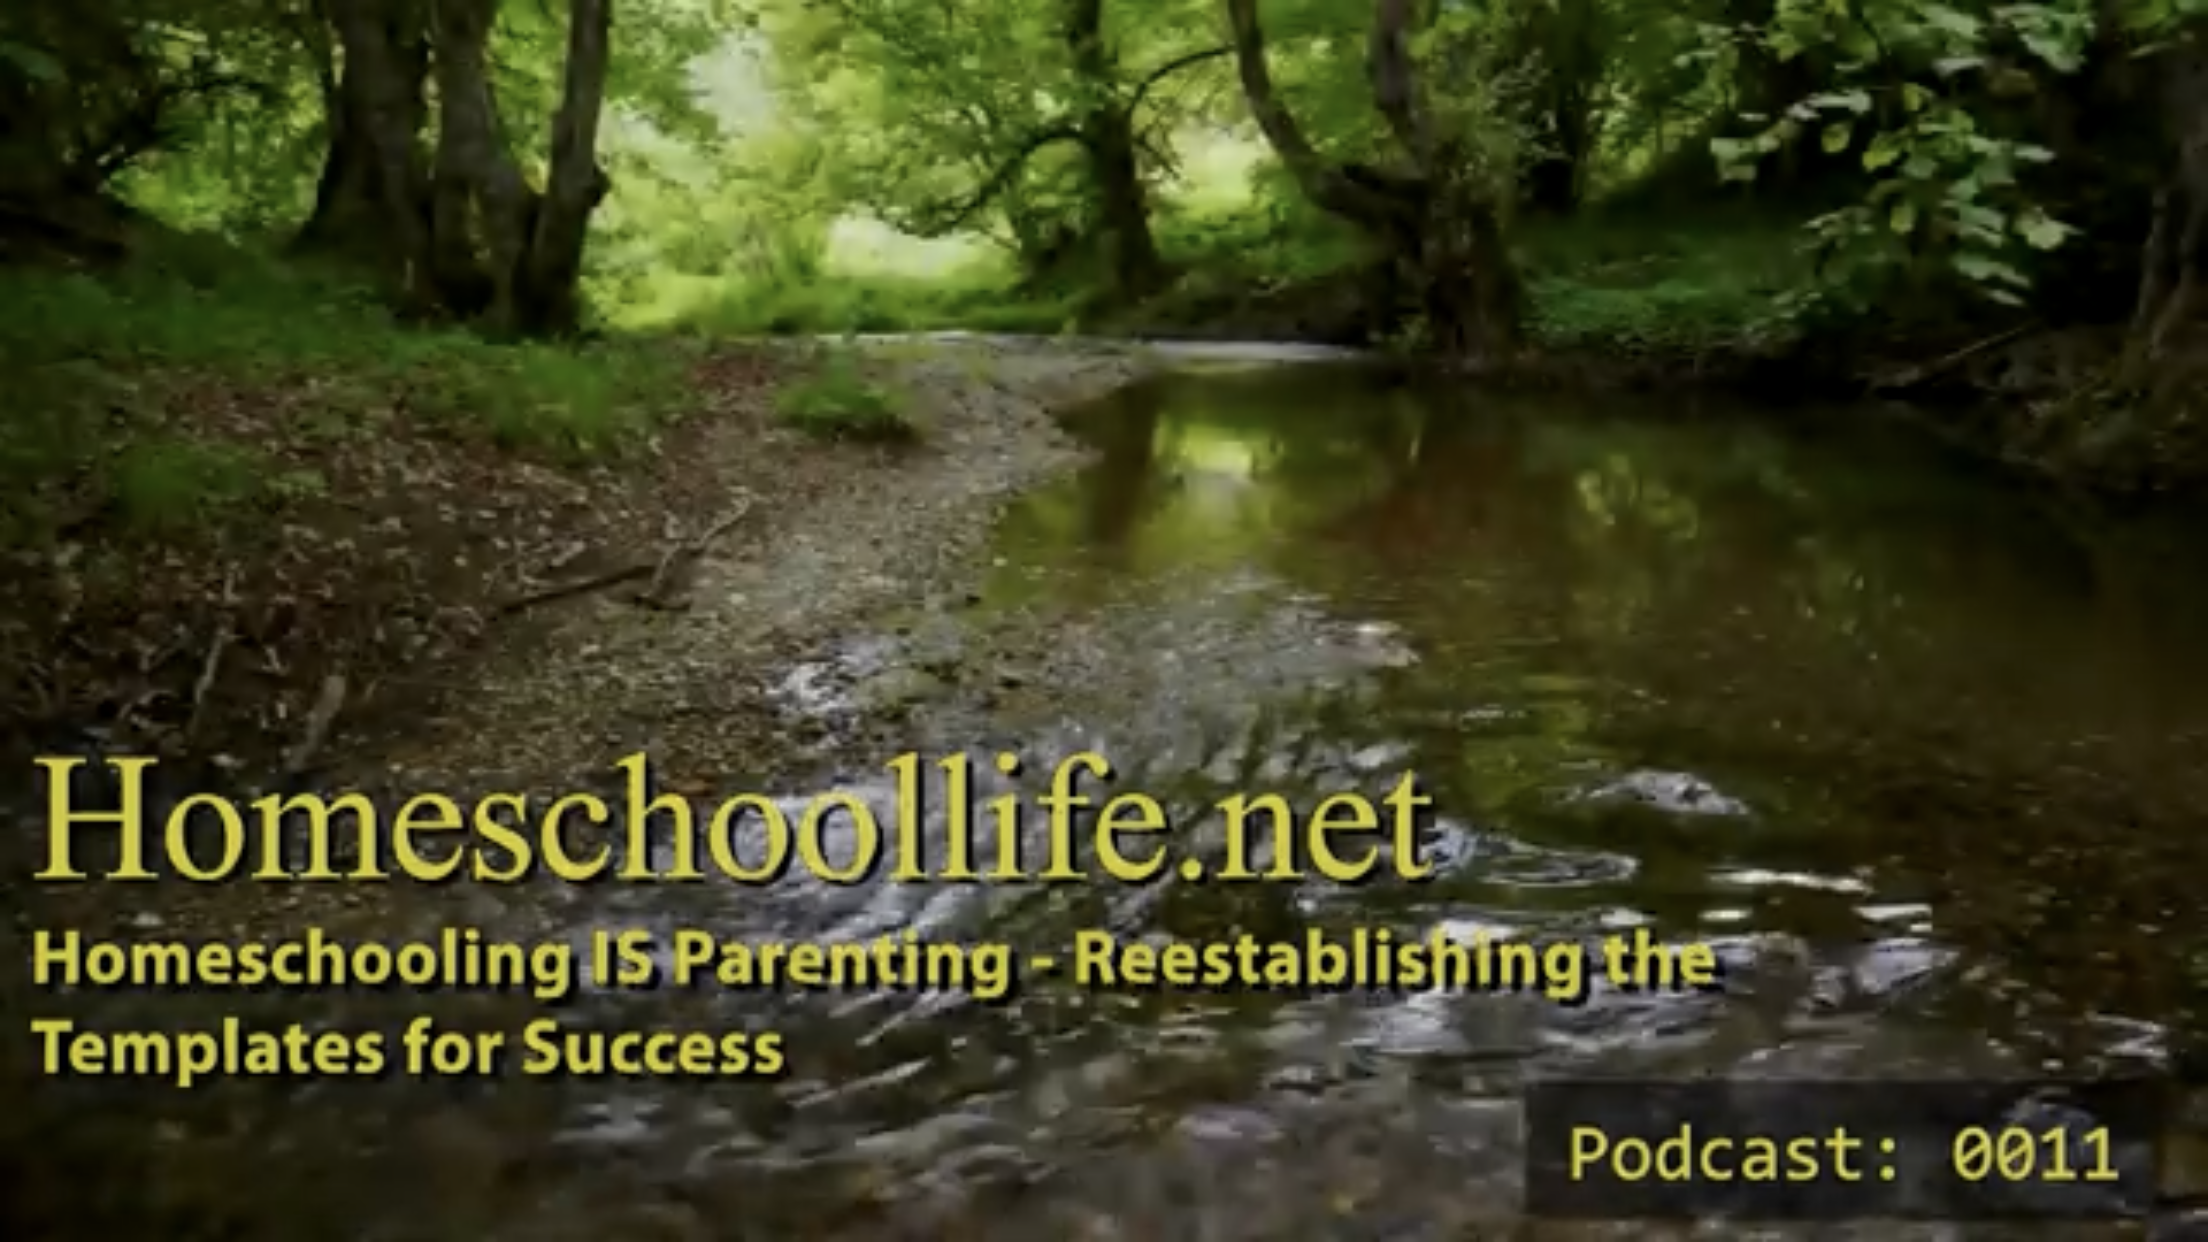 (Podcast 0011) Homeschooling is Parenting - Reestablishing the Templates for Success